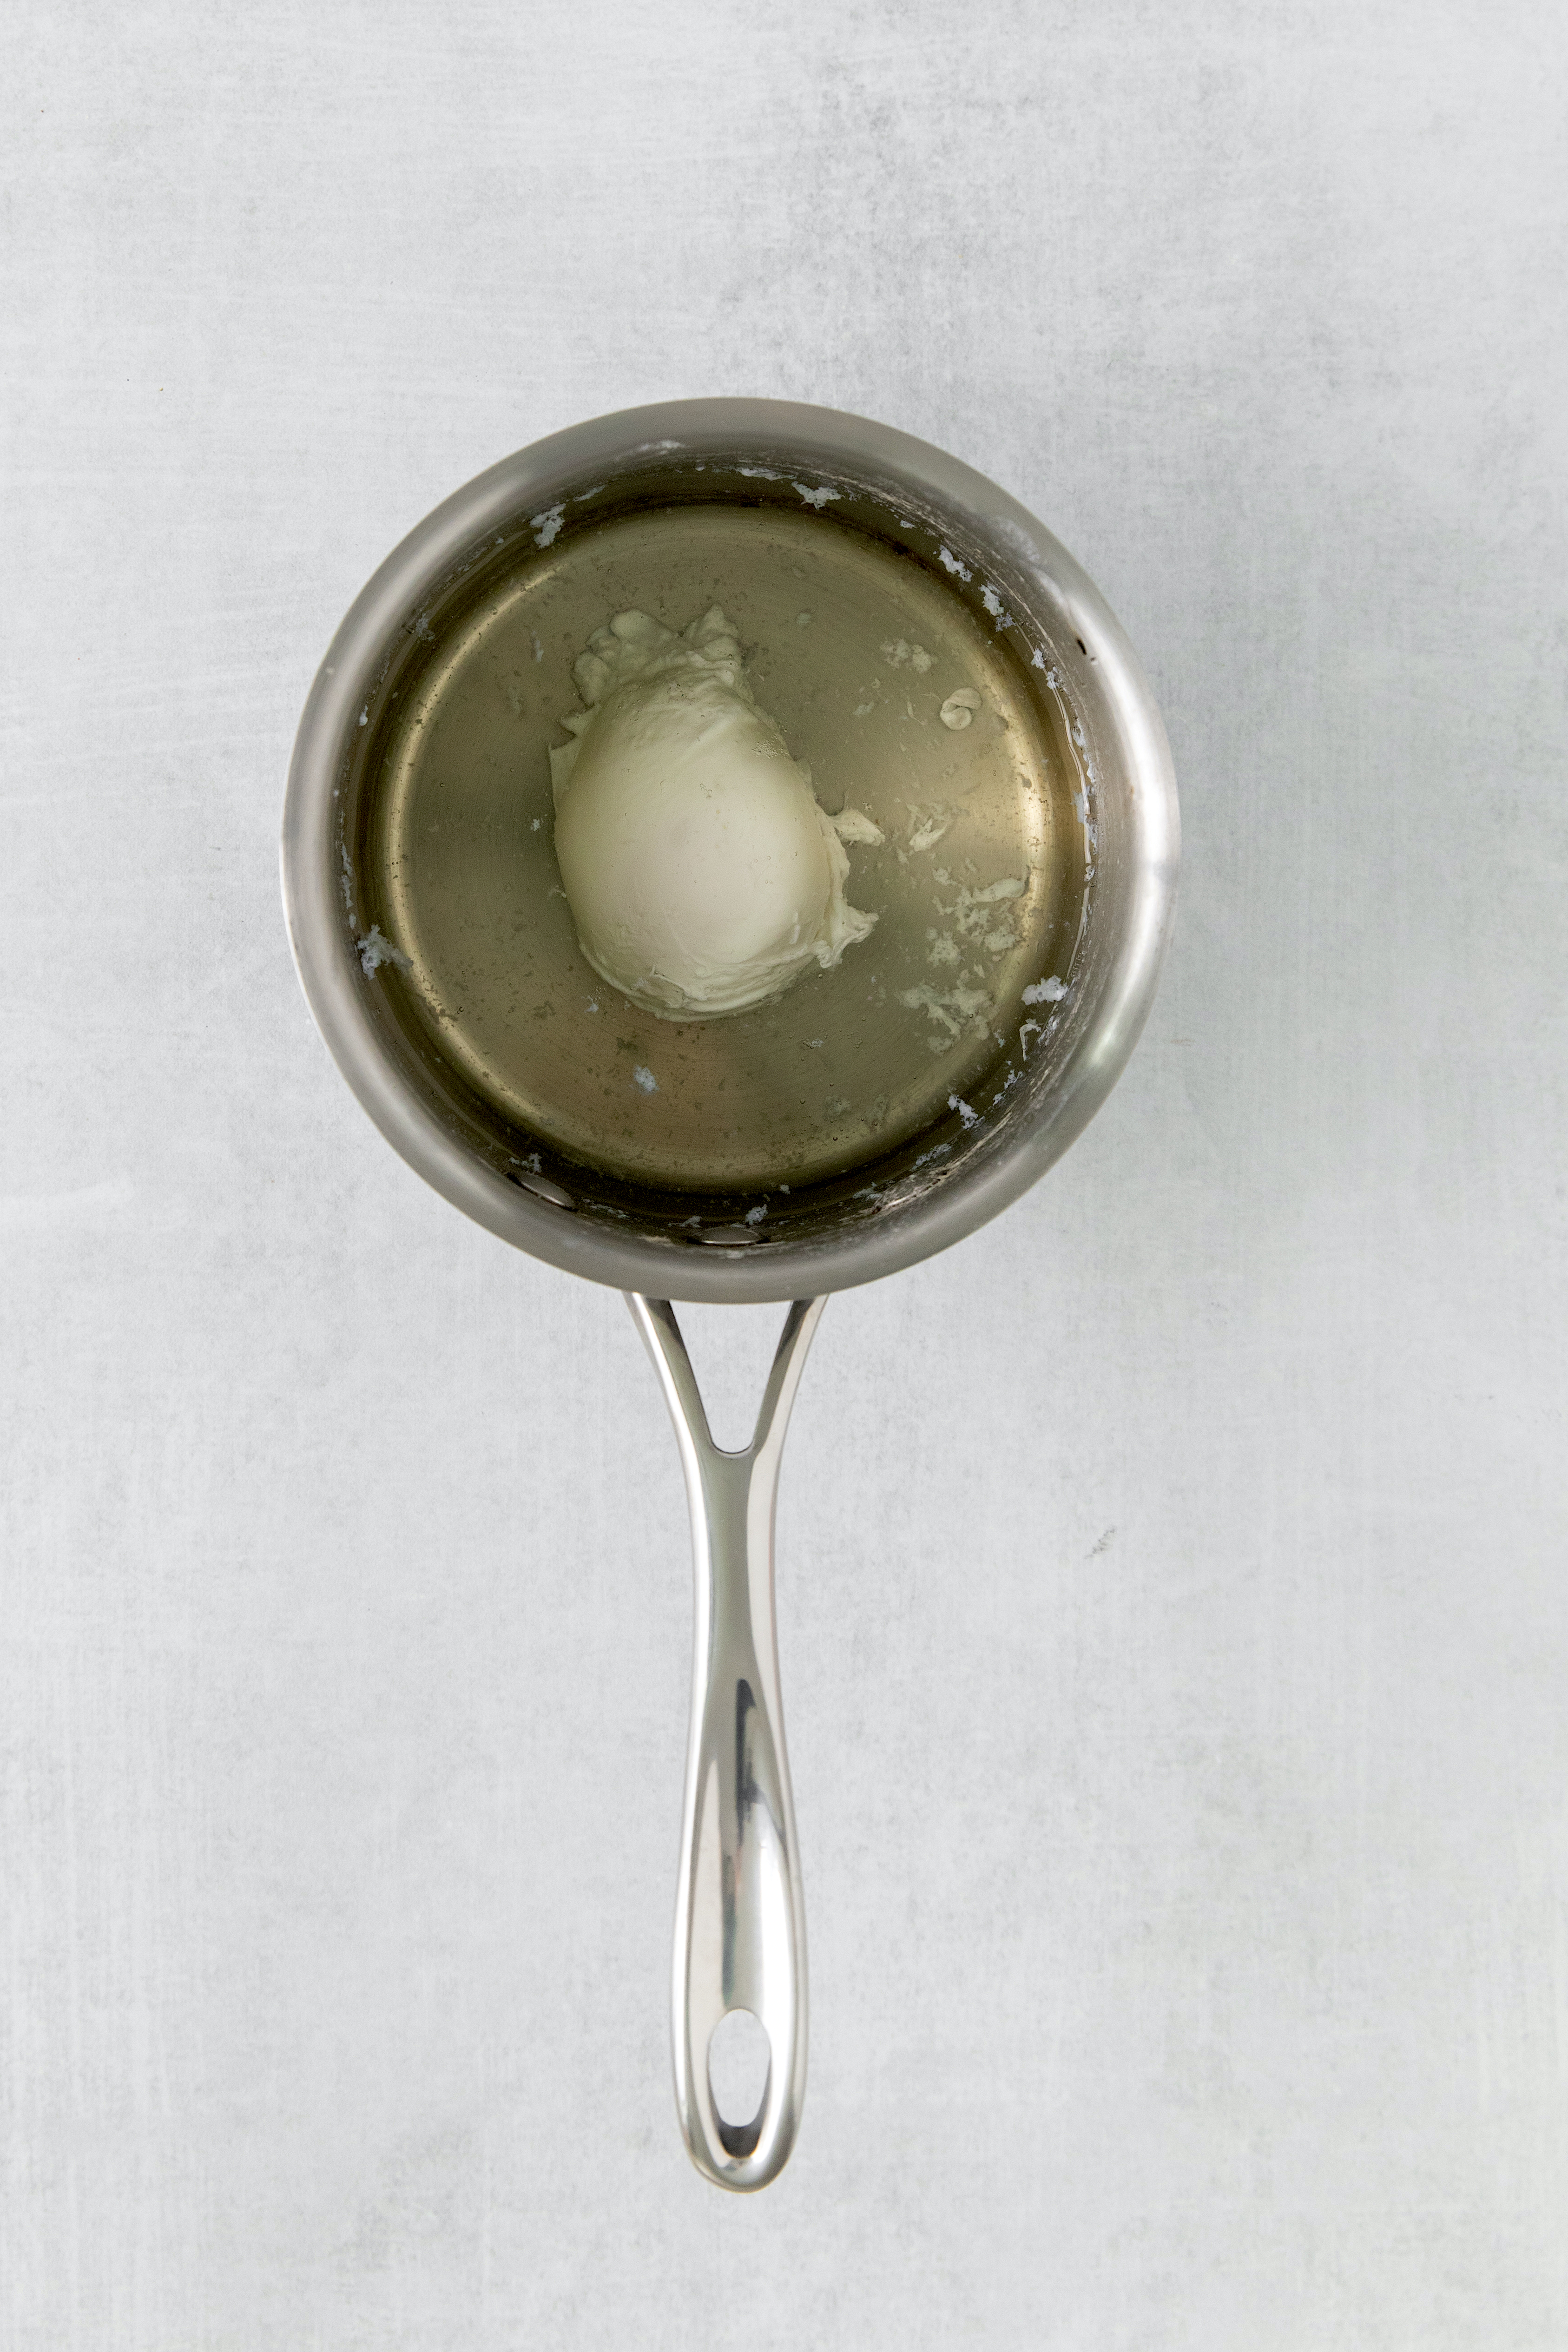 an egg in a pot of boiling water from above.